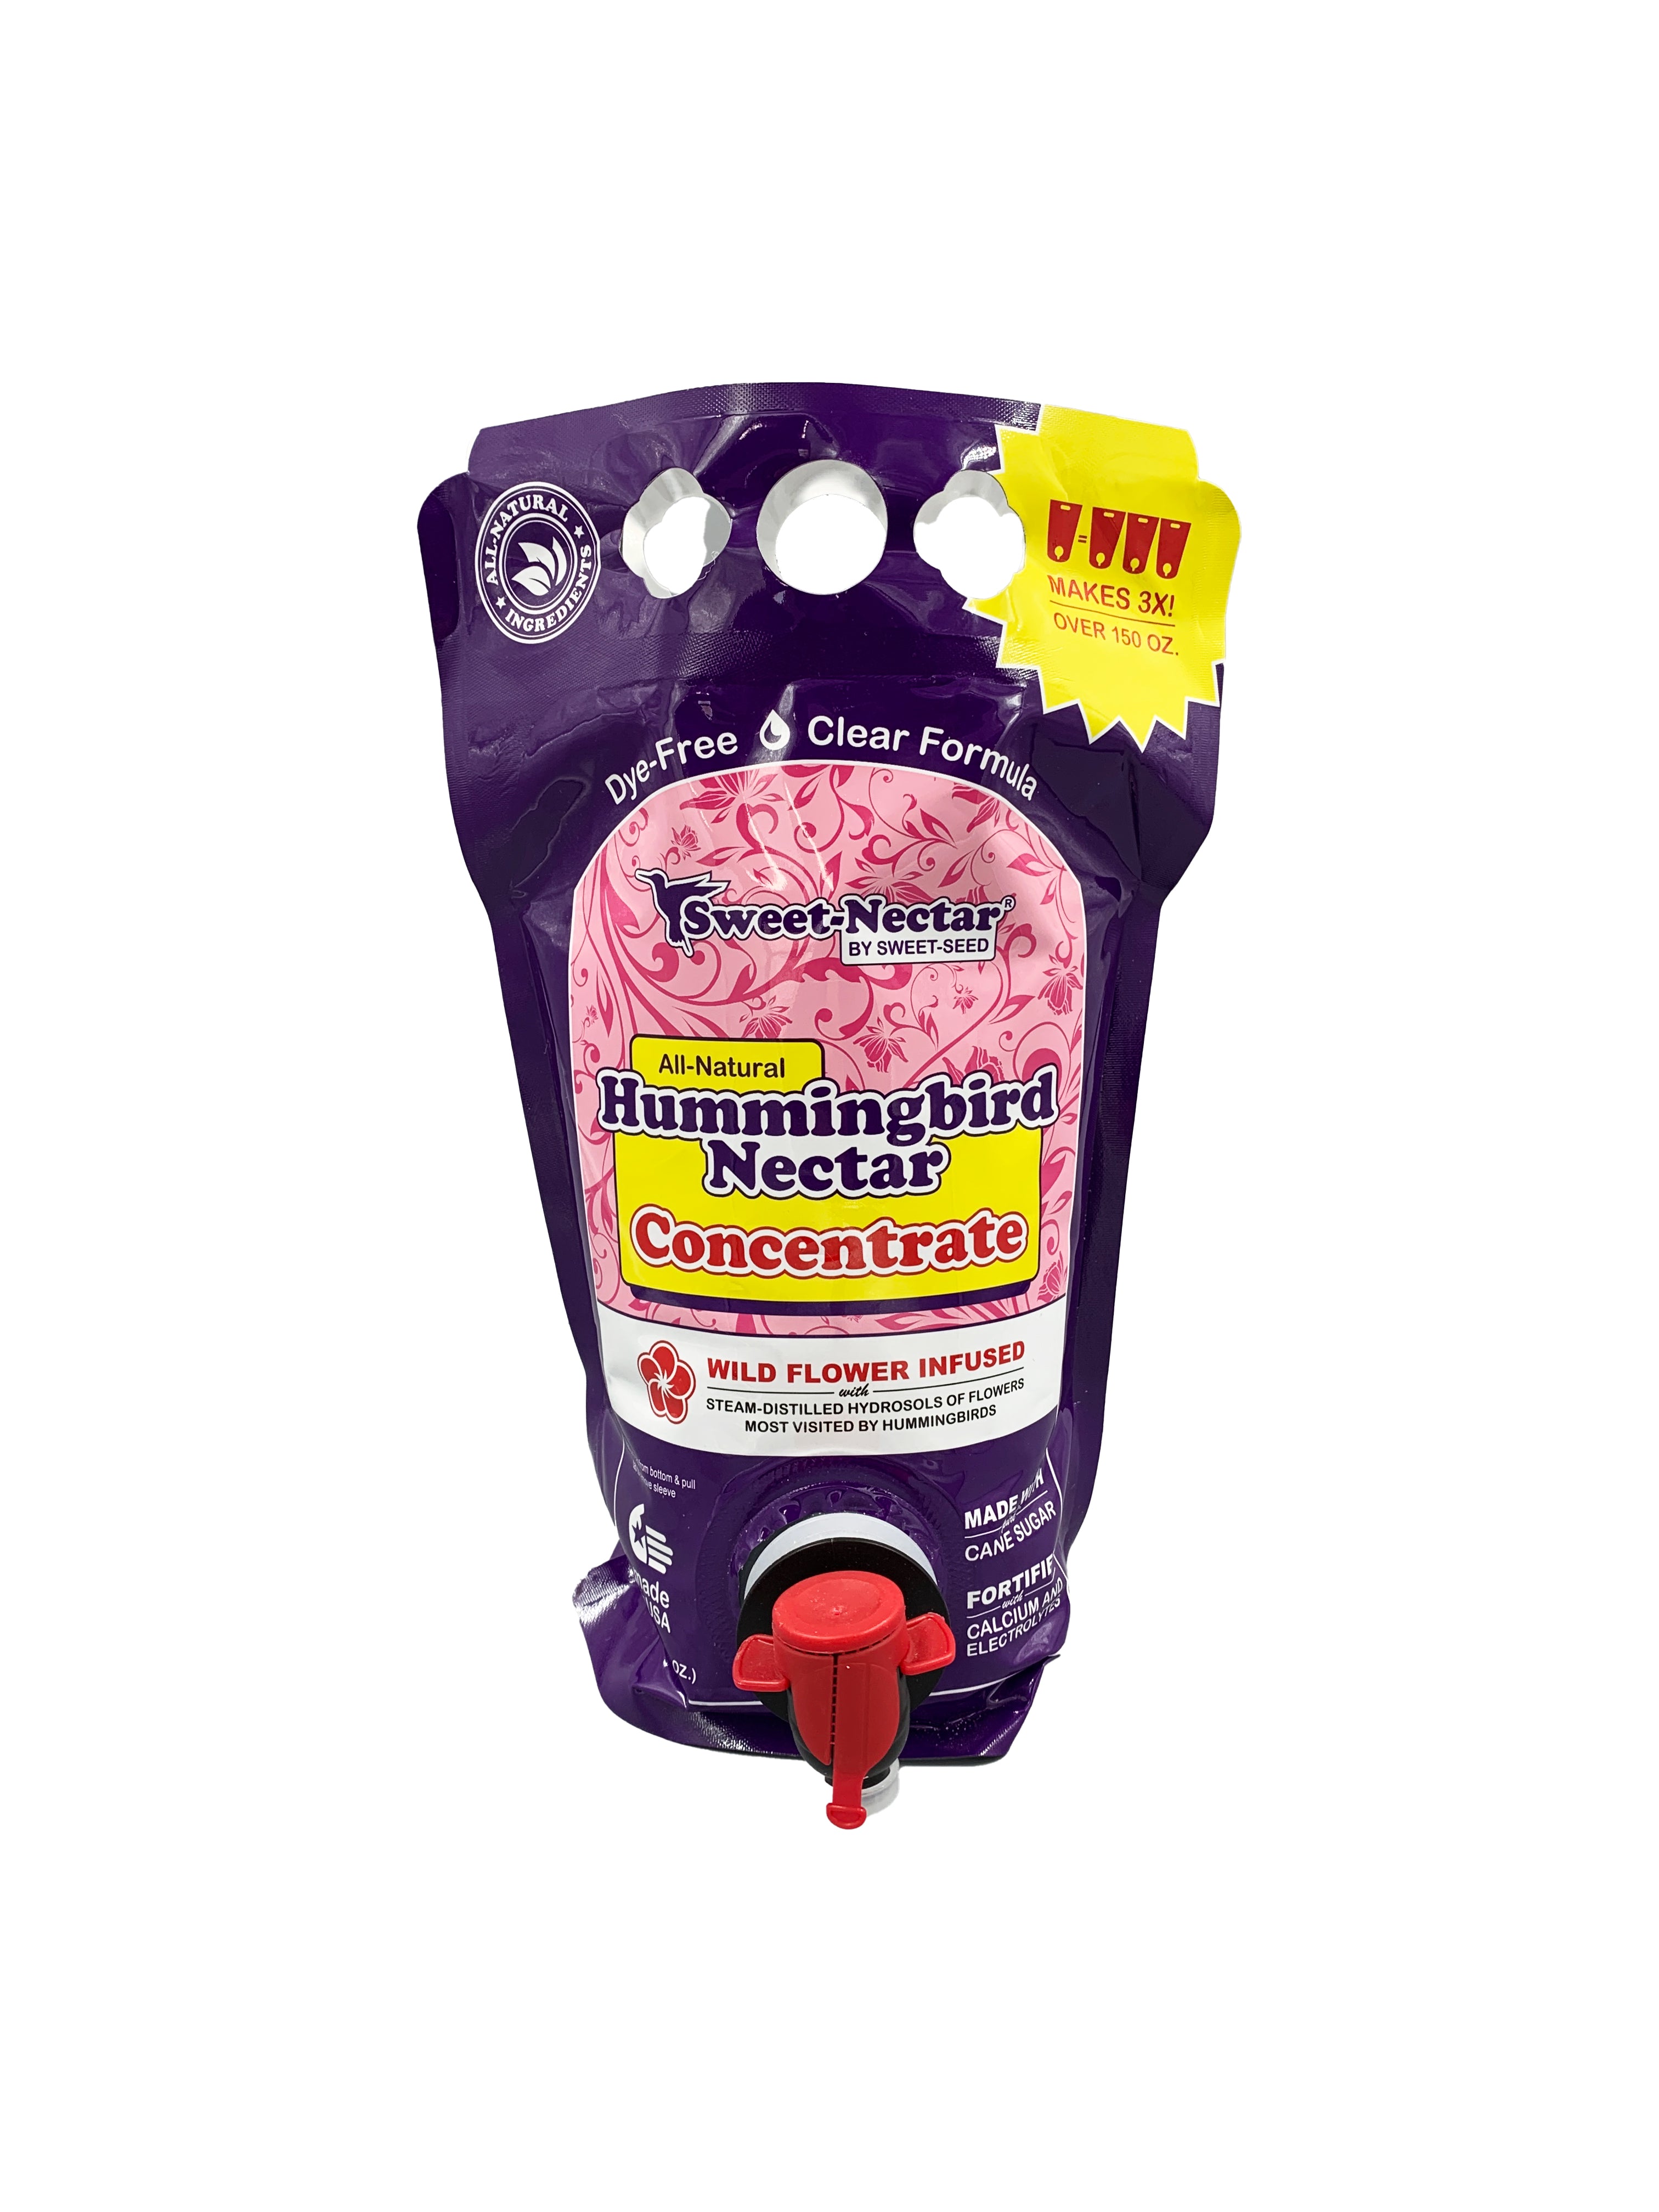 Sweet Seed Hummingbird Nectar Concentrate Bag 1.5L Bag